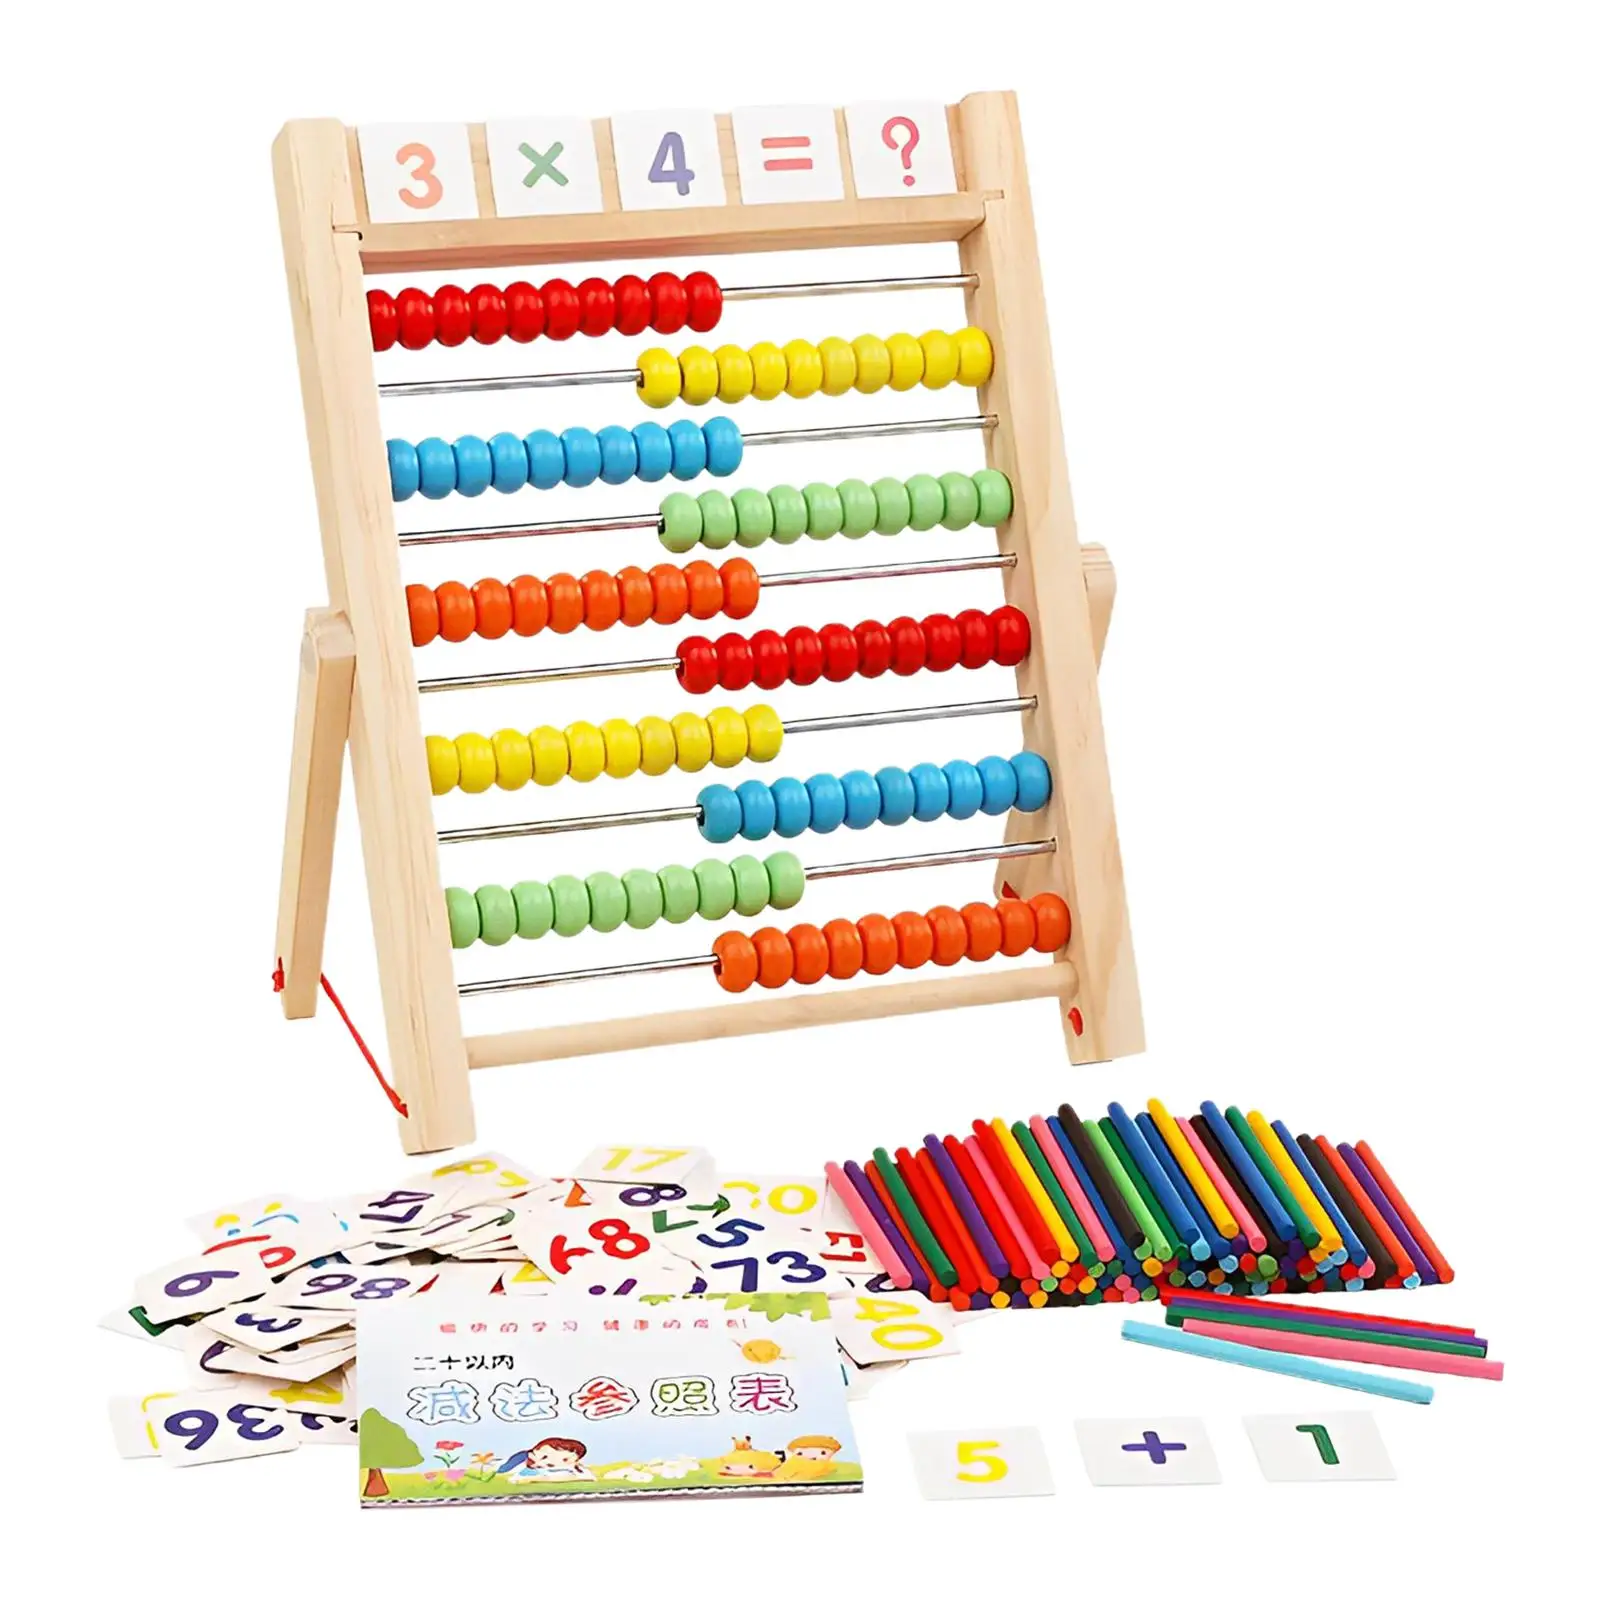 Add Subtract Abacus Bead Arithmetic Abacus Number Learning Educational Counting Toy for Toddlers Kids Boys Girls Preschool